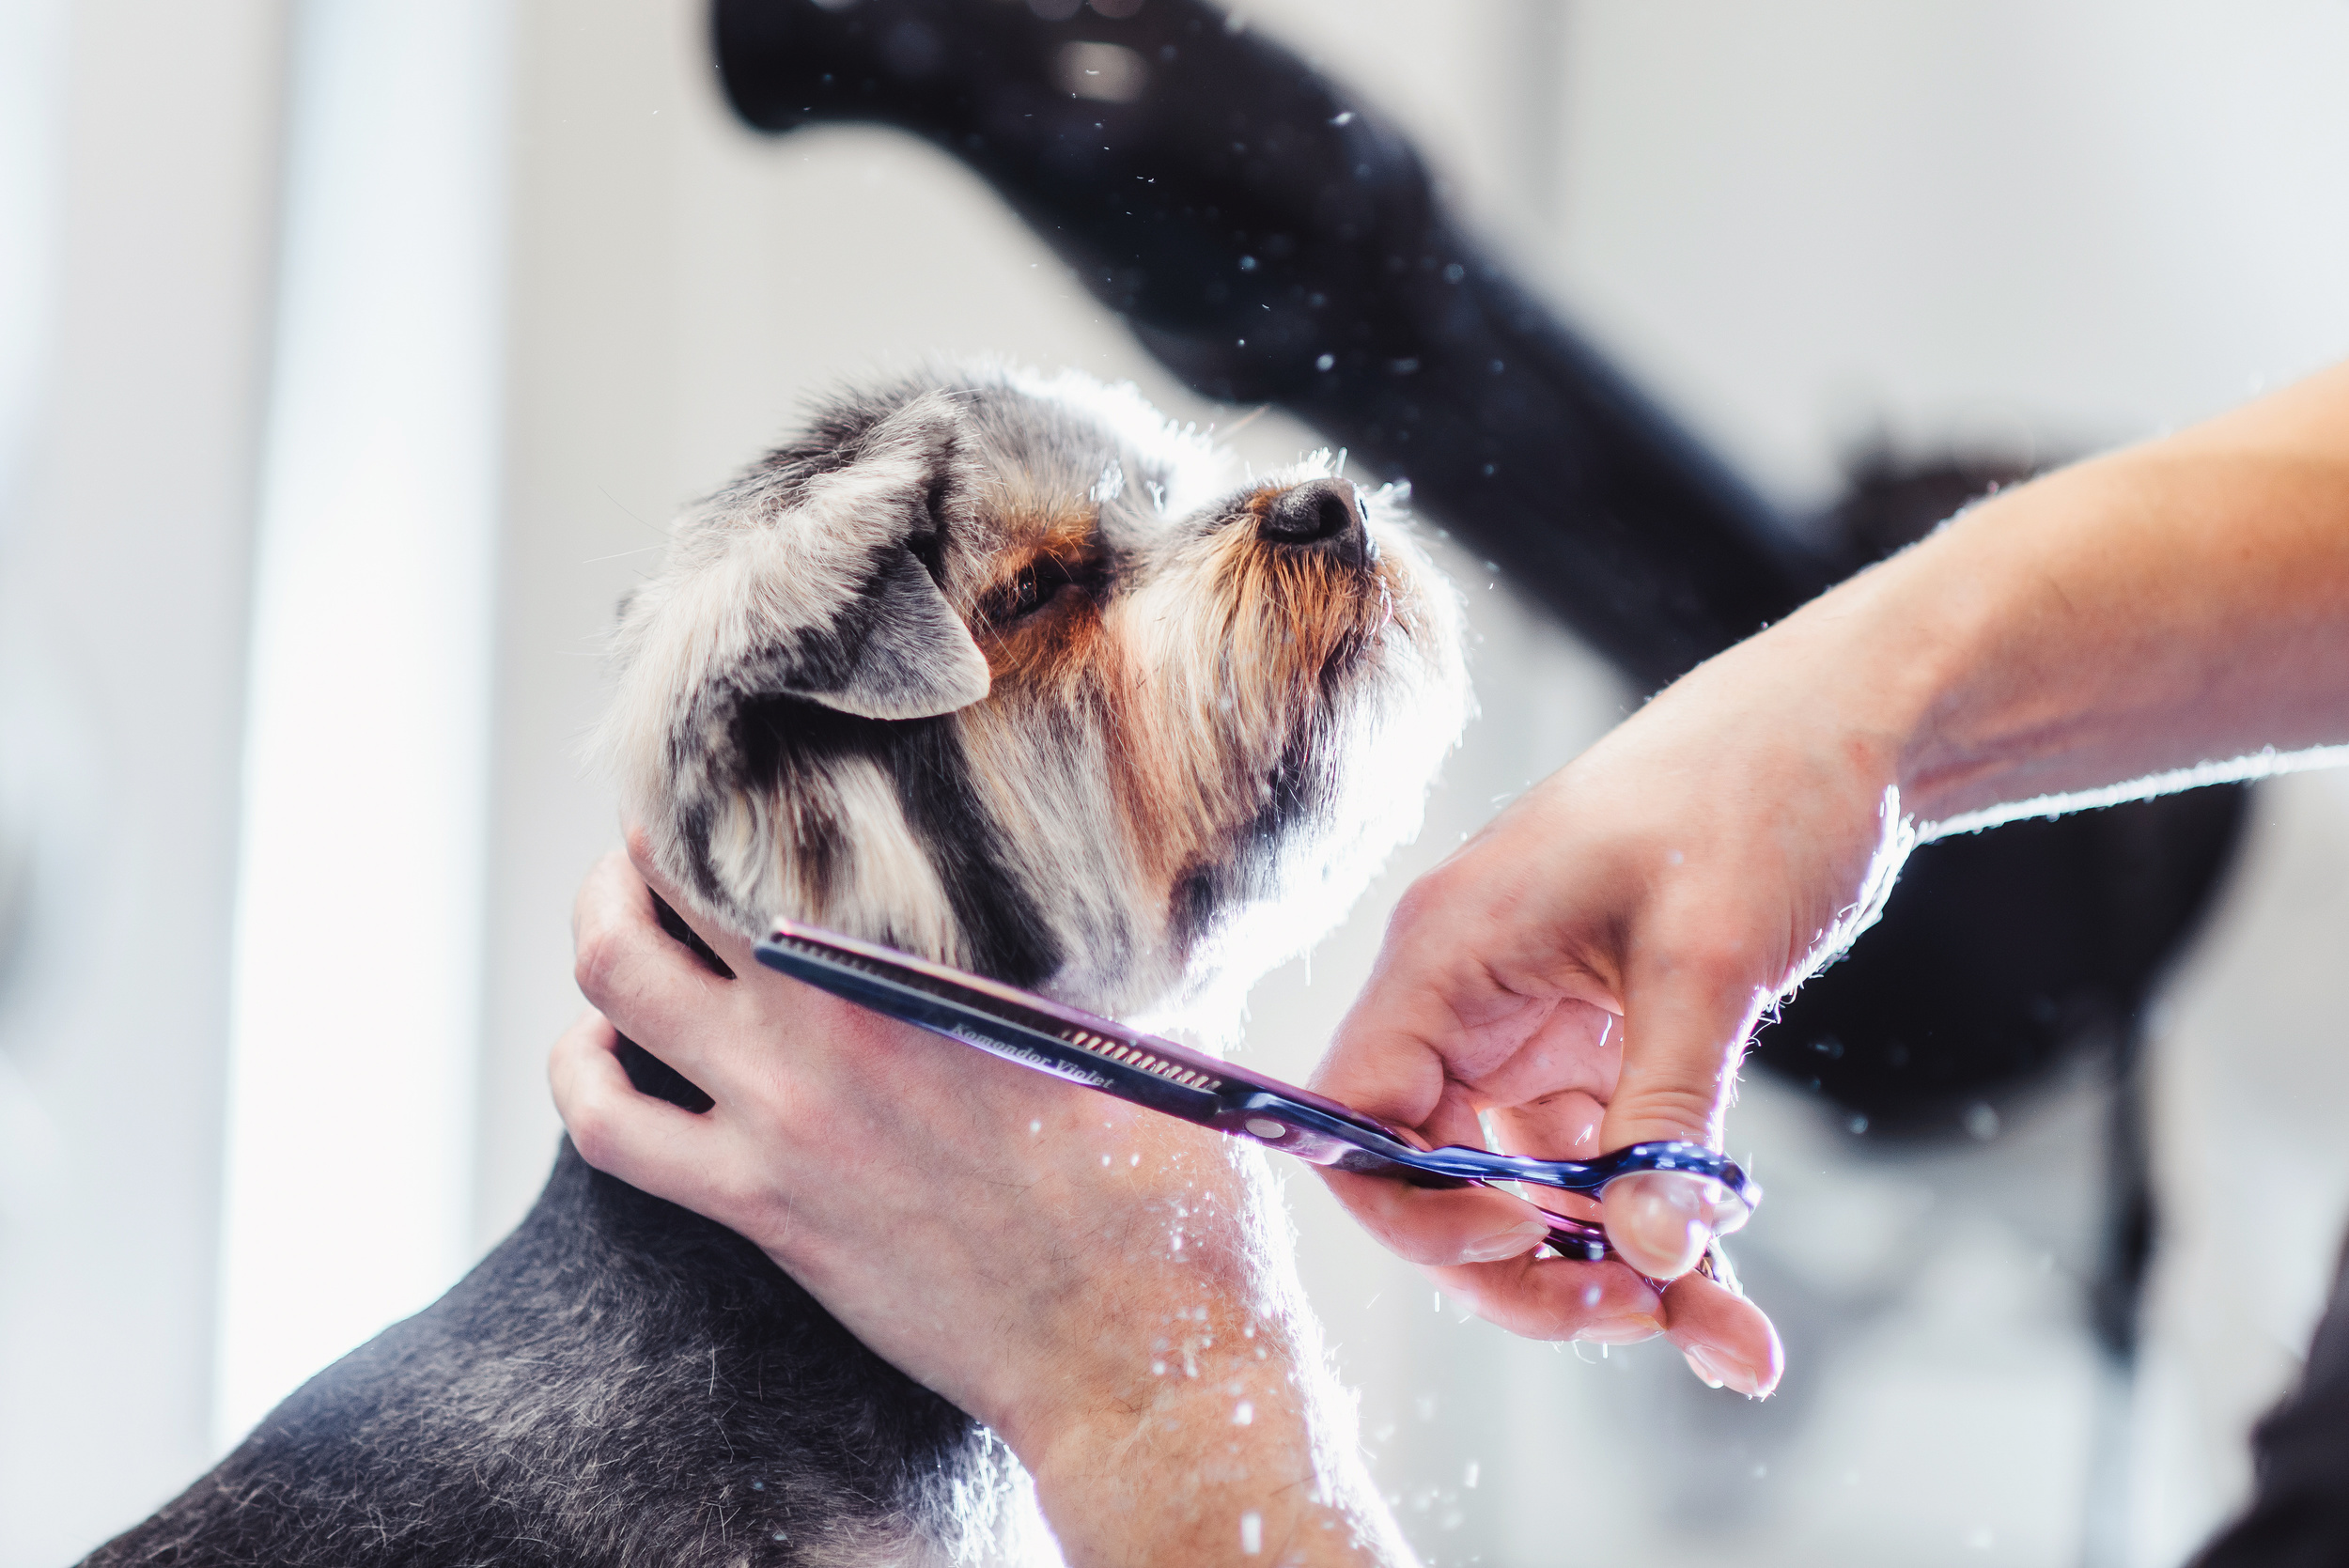 <p>Some dogs and cats can be bathed at home without issue, while others will need regular trips to a professional groomer to maintain their skin and coat. If your pet needs professional grooming, seek recommendations from friends to ensure that the person taking care of your pet is reputable. </p>